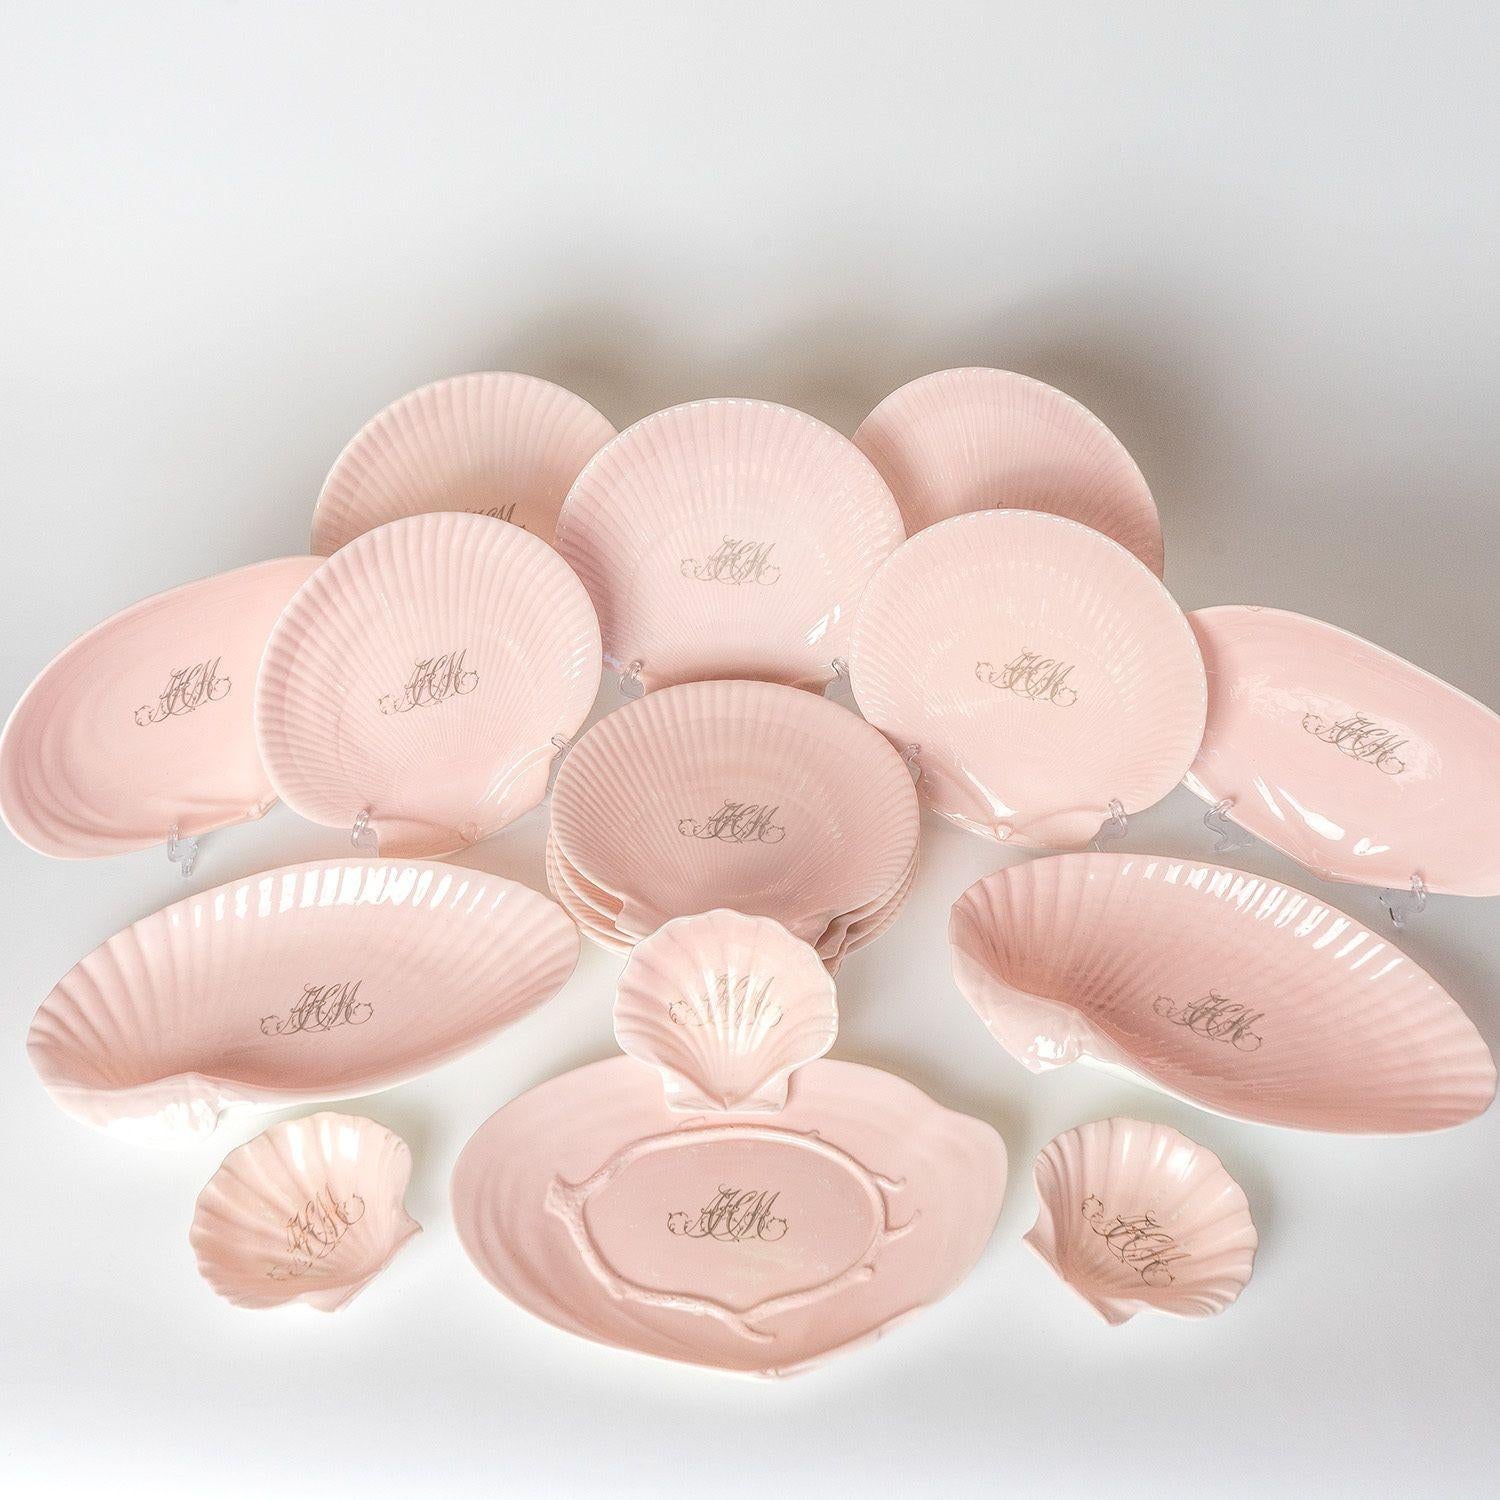 Pink Porcelain 'Nautilus' Dessert Service by Wedgwood for John Mortlock, 1880s For Sale 1